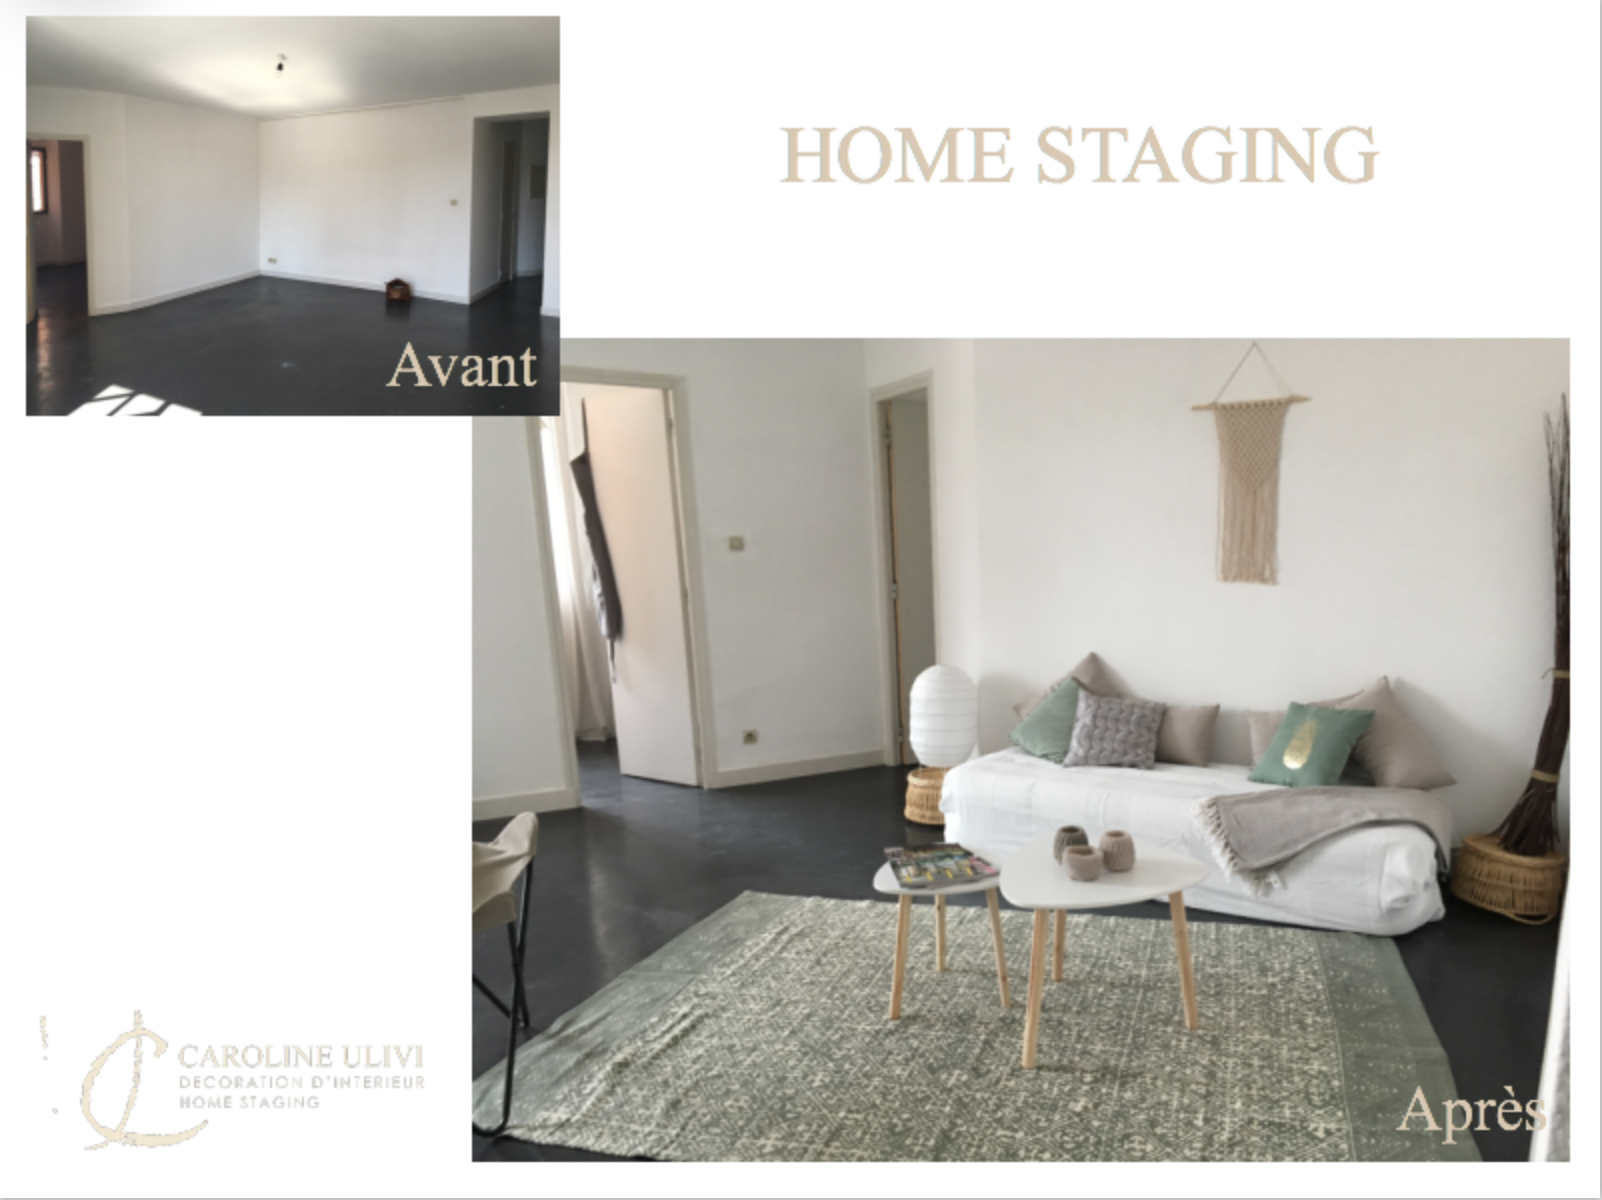 Home staging salon